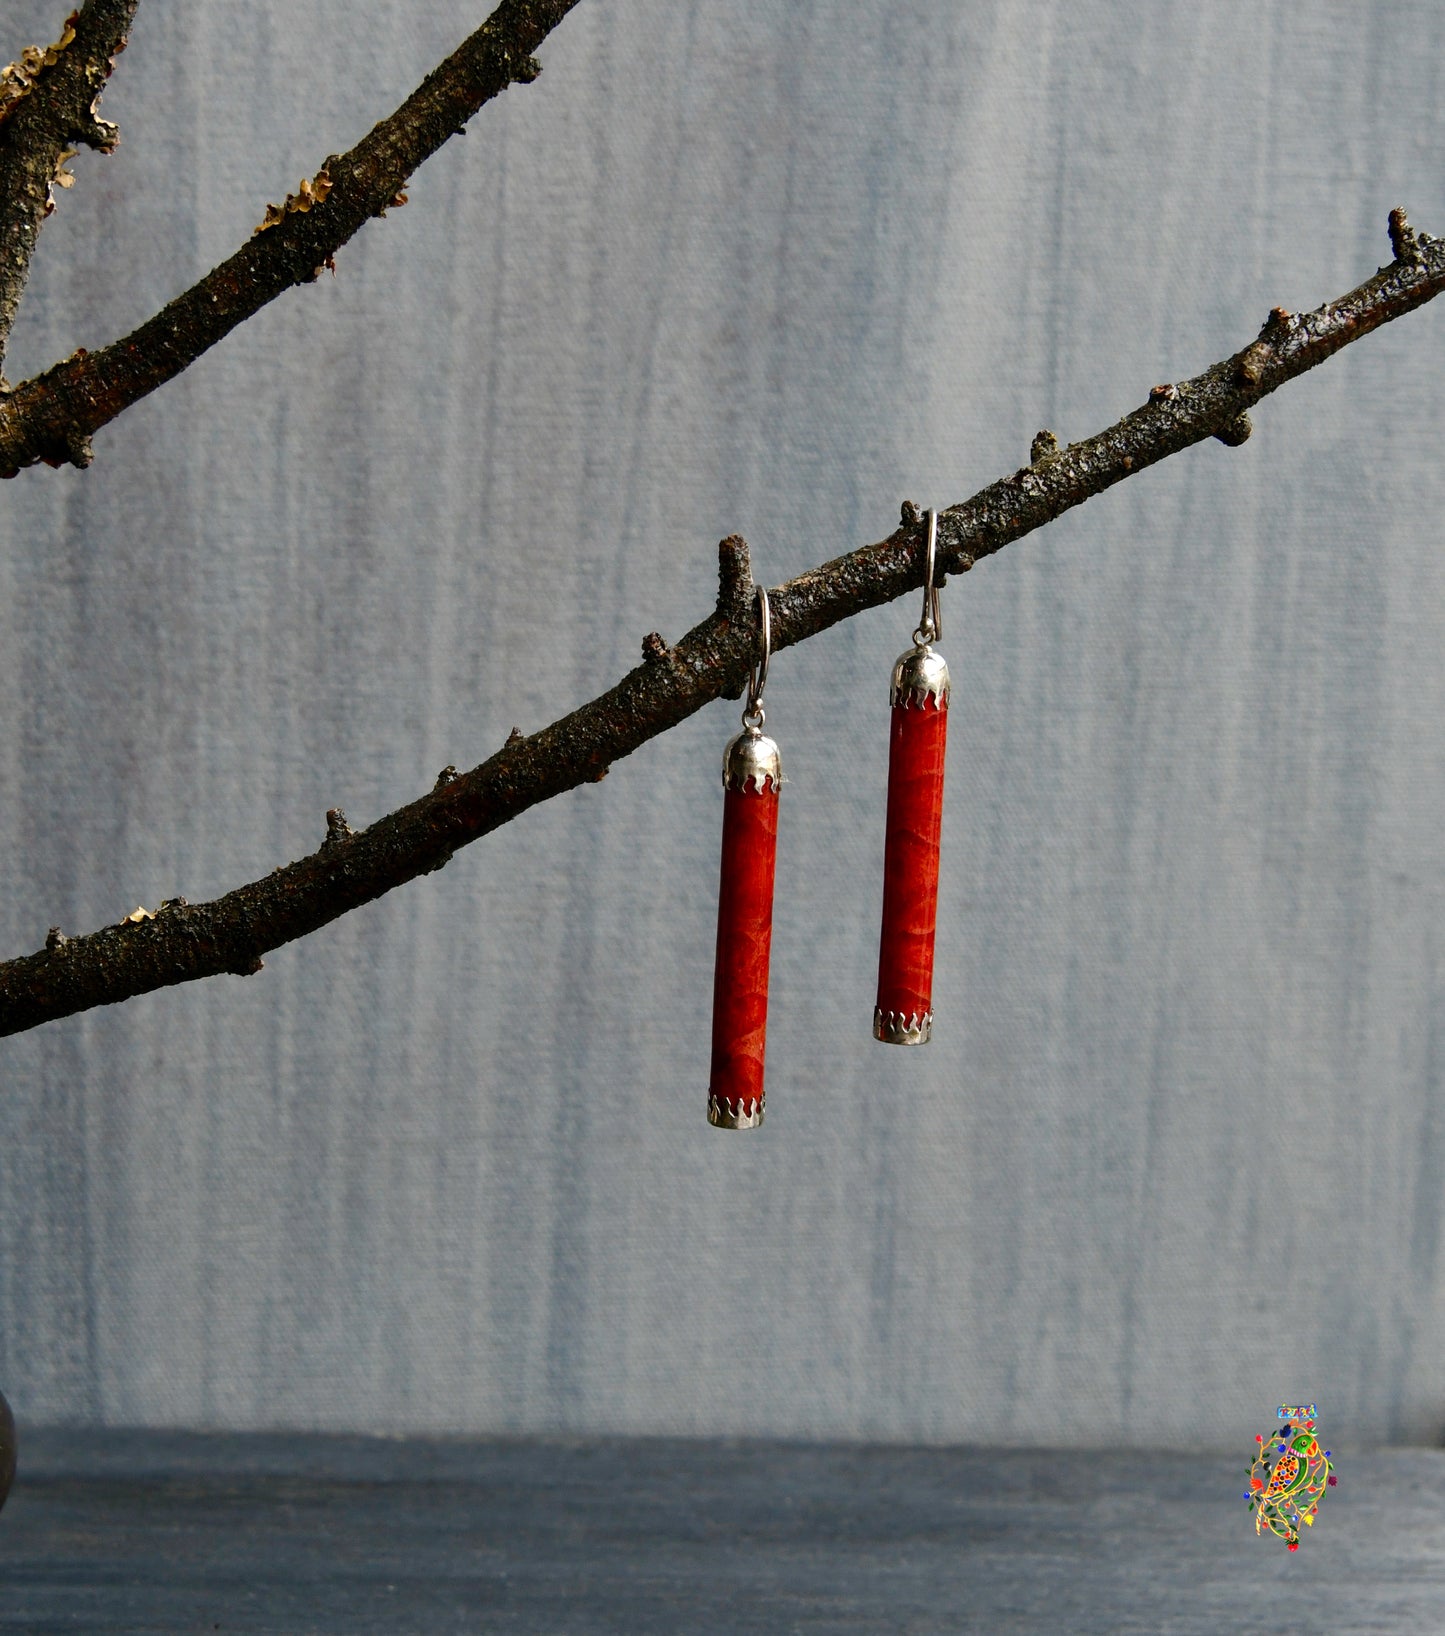 Coral Cylinder Earrings